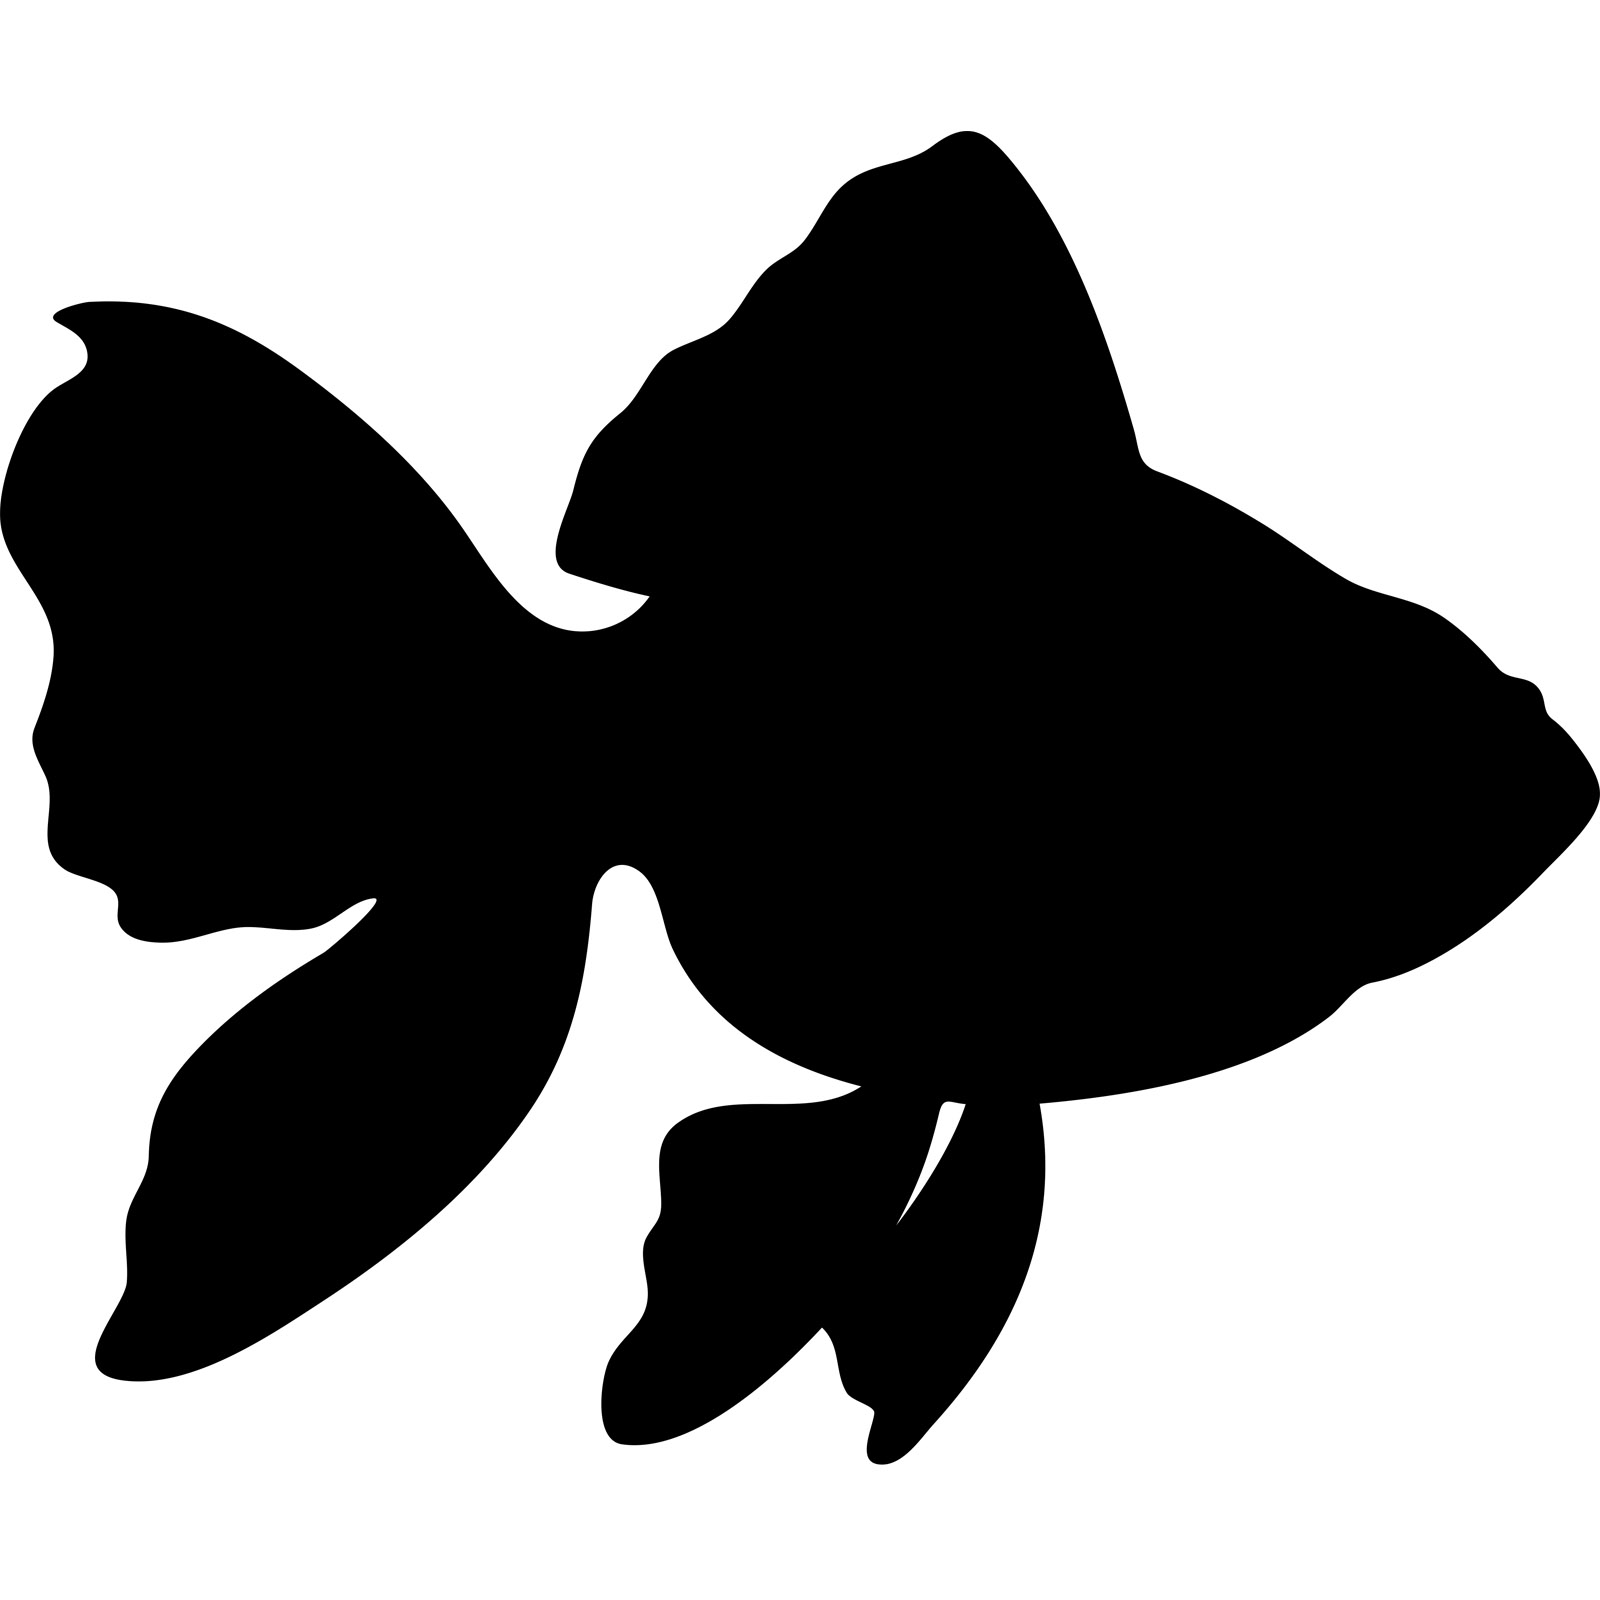 Fish Silhouette Related Keywords  Suggestions - Fish Silhouette 